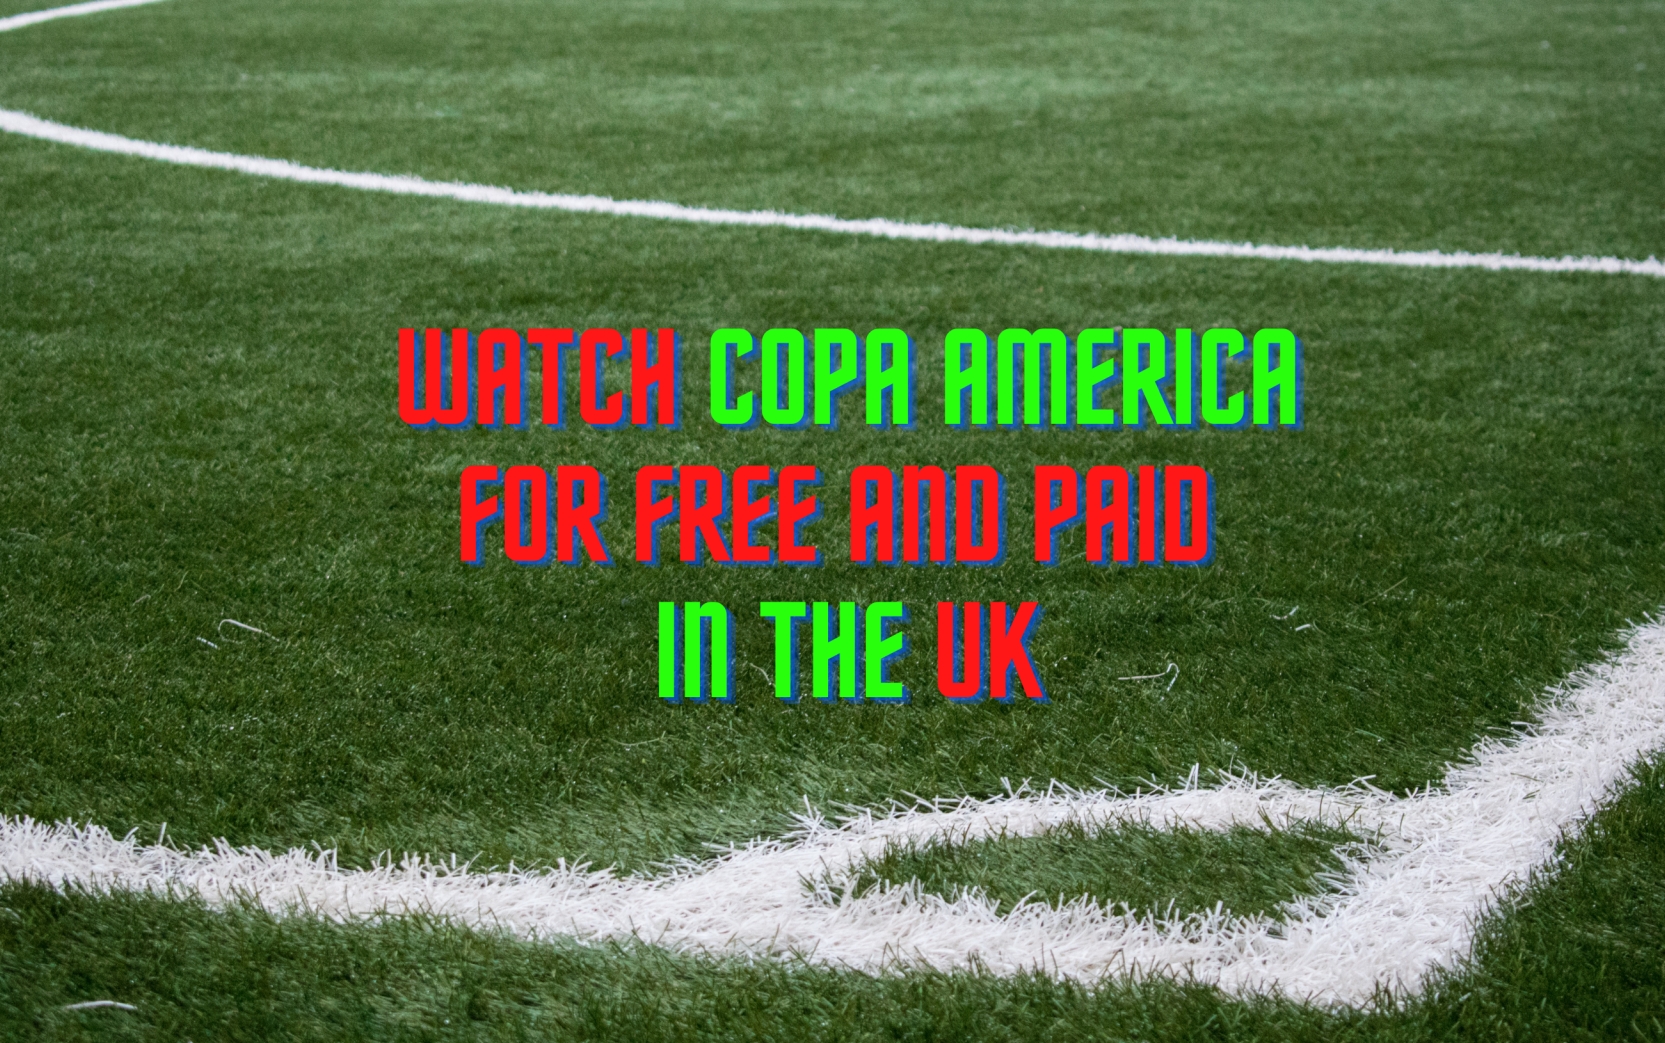 Watch Copa America in UK for Free and Paid